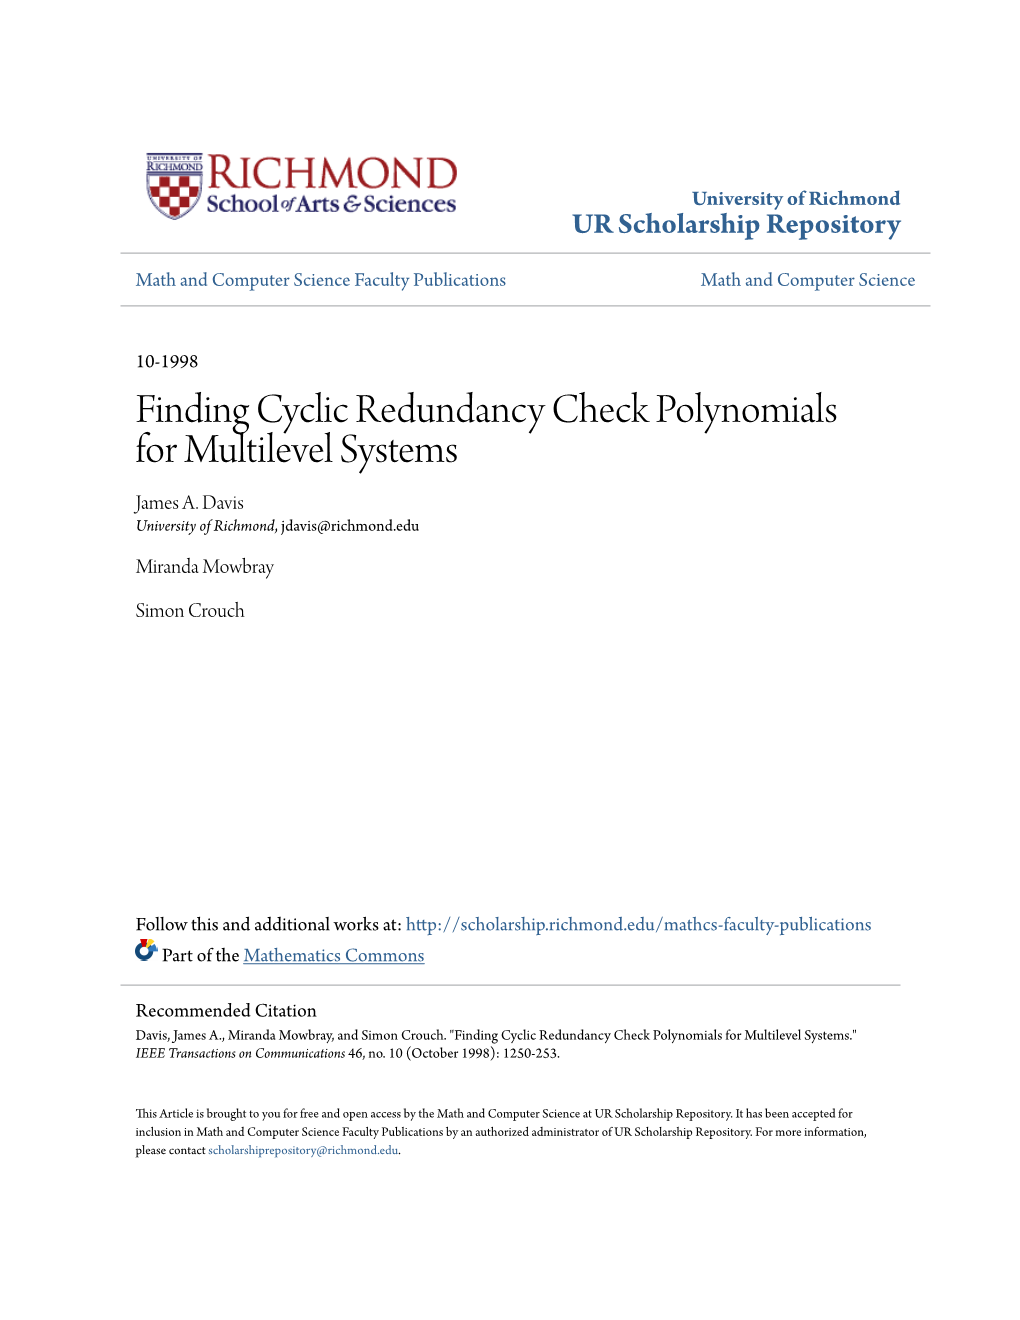 Finding Cyclic Redundancy Check Polynomials for Multilevel Systems James A